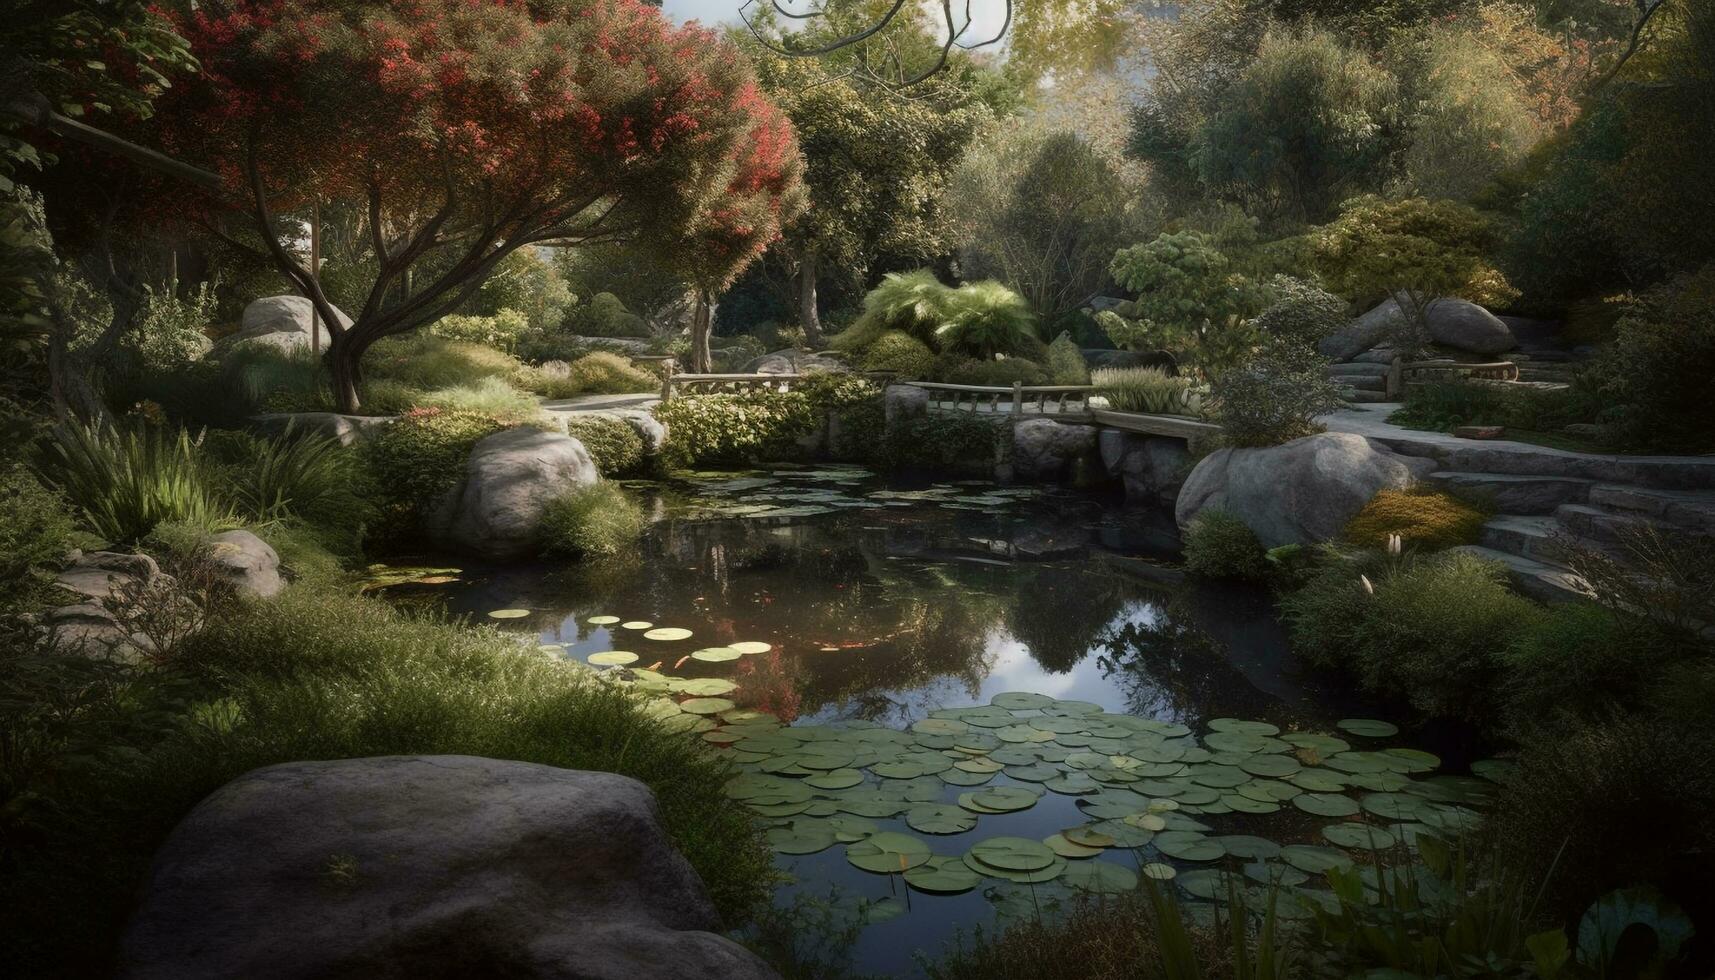 Tranquil scene of a pond in a formal garden with foliage generated by AI photo